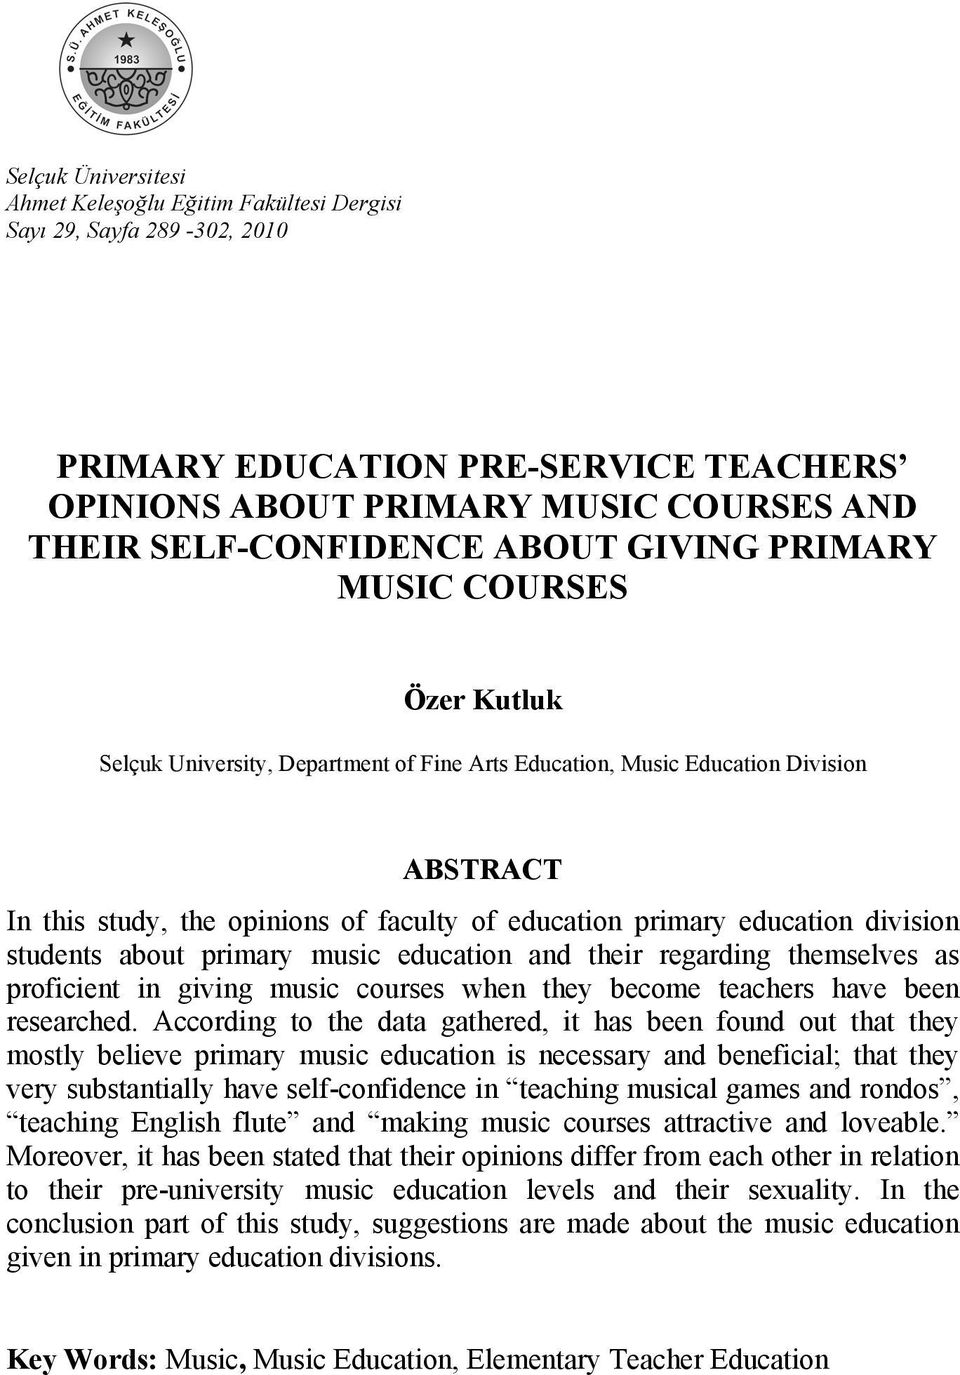 division students about primary music education and their regarding themselves as proficient in giving music courses when they become teachers have been researched.